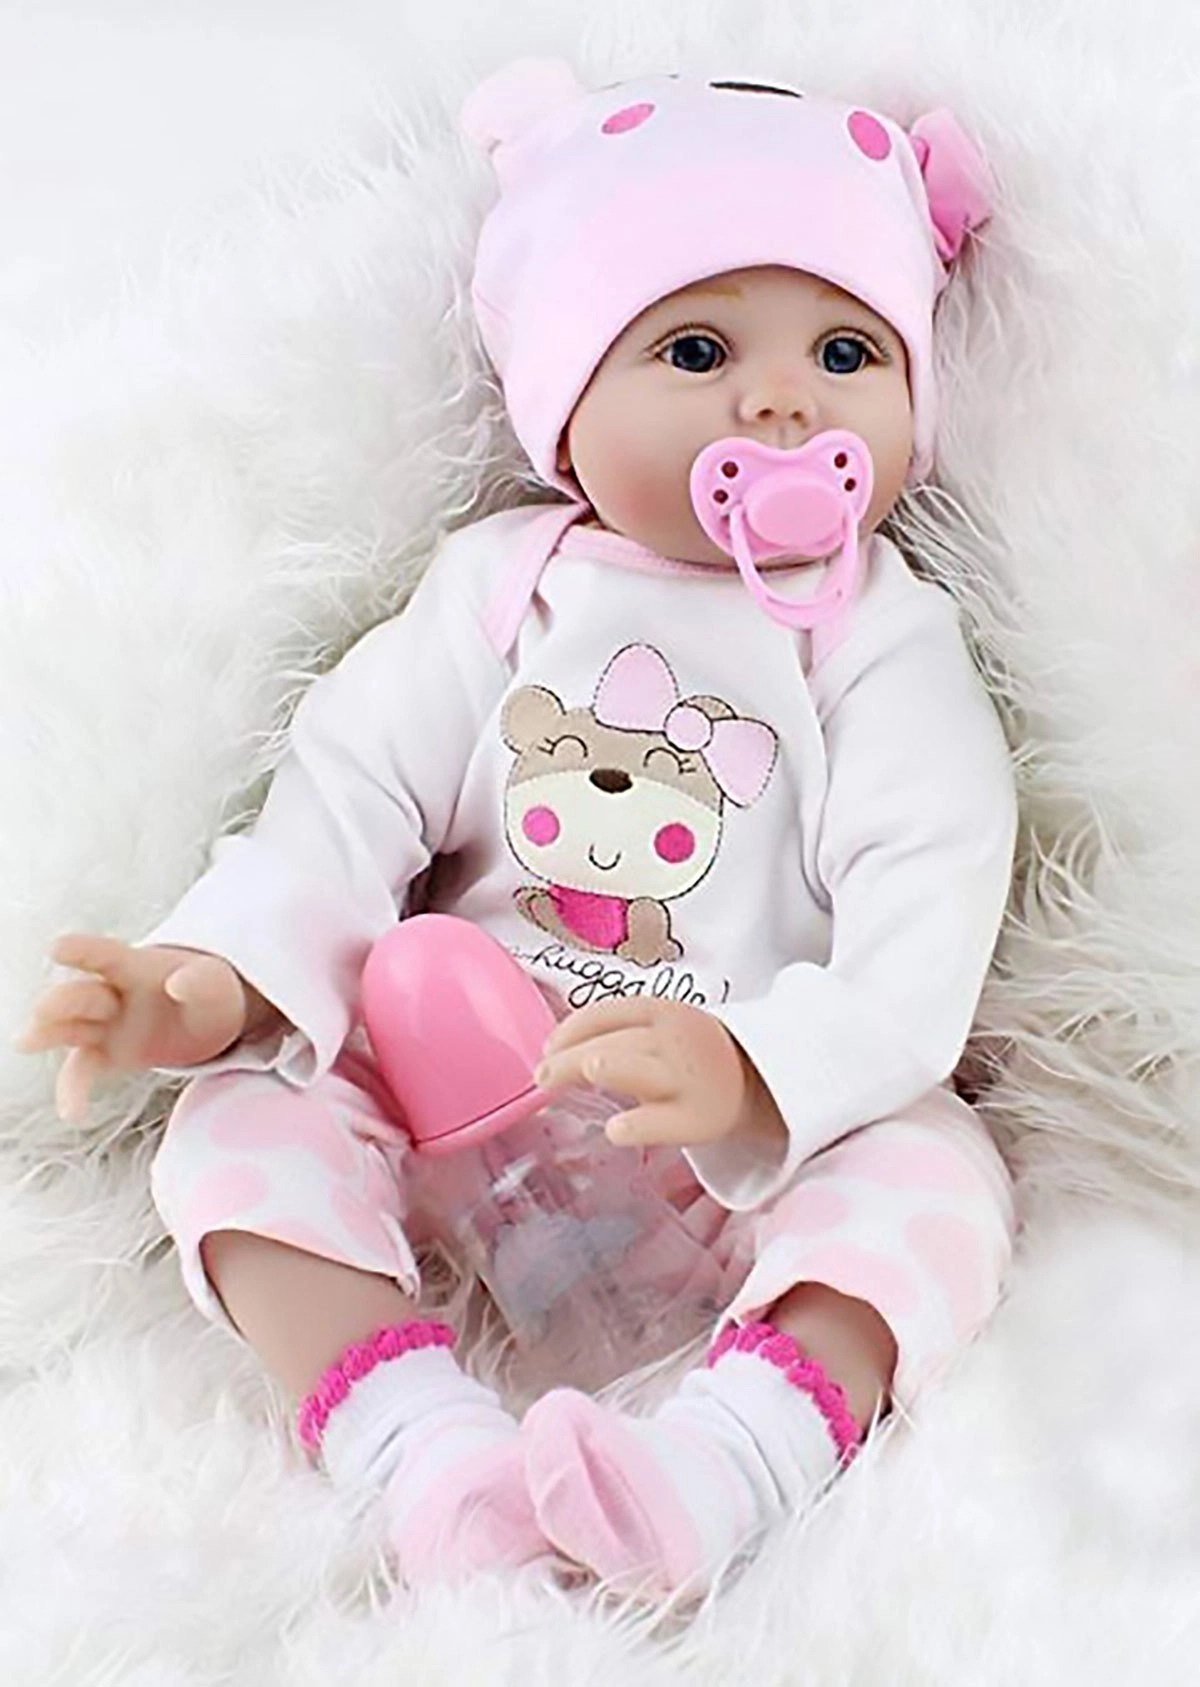 How To Care For A Reborn Doll